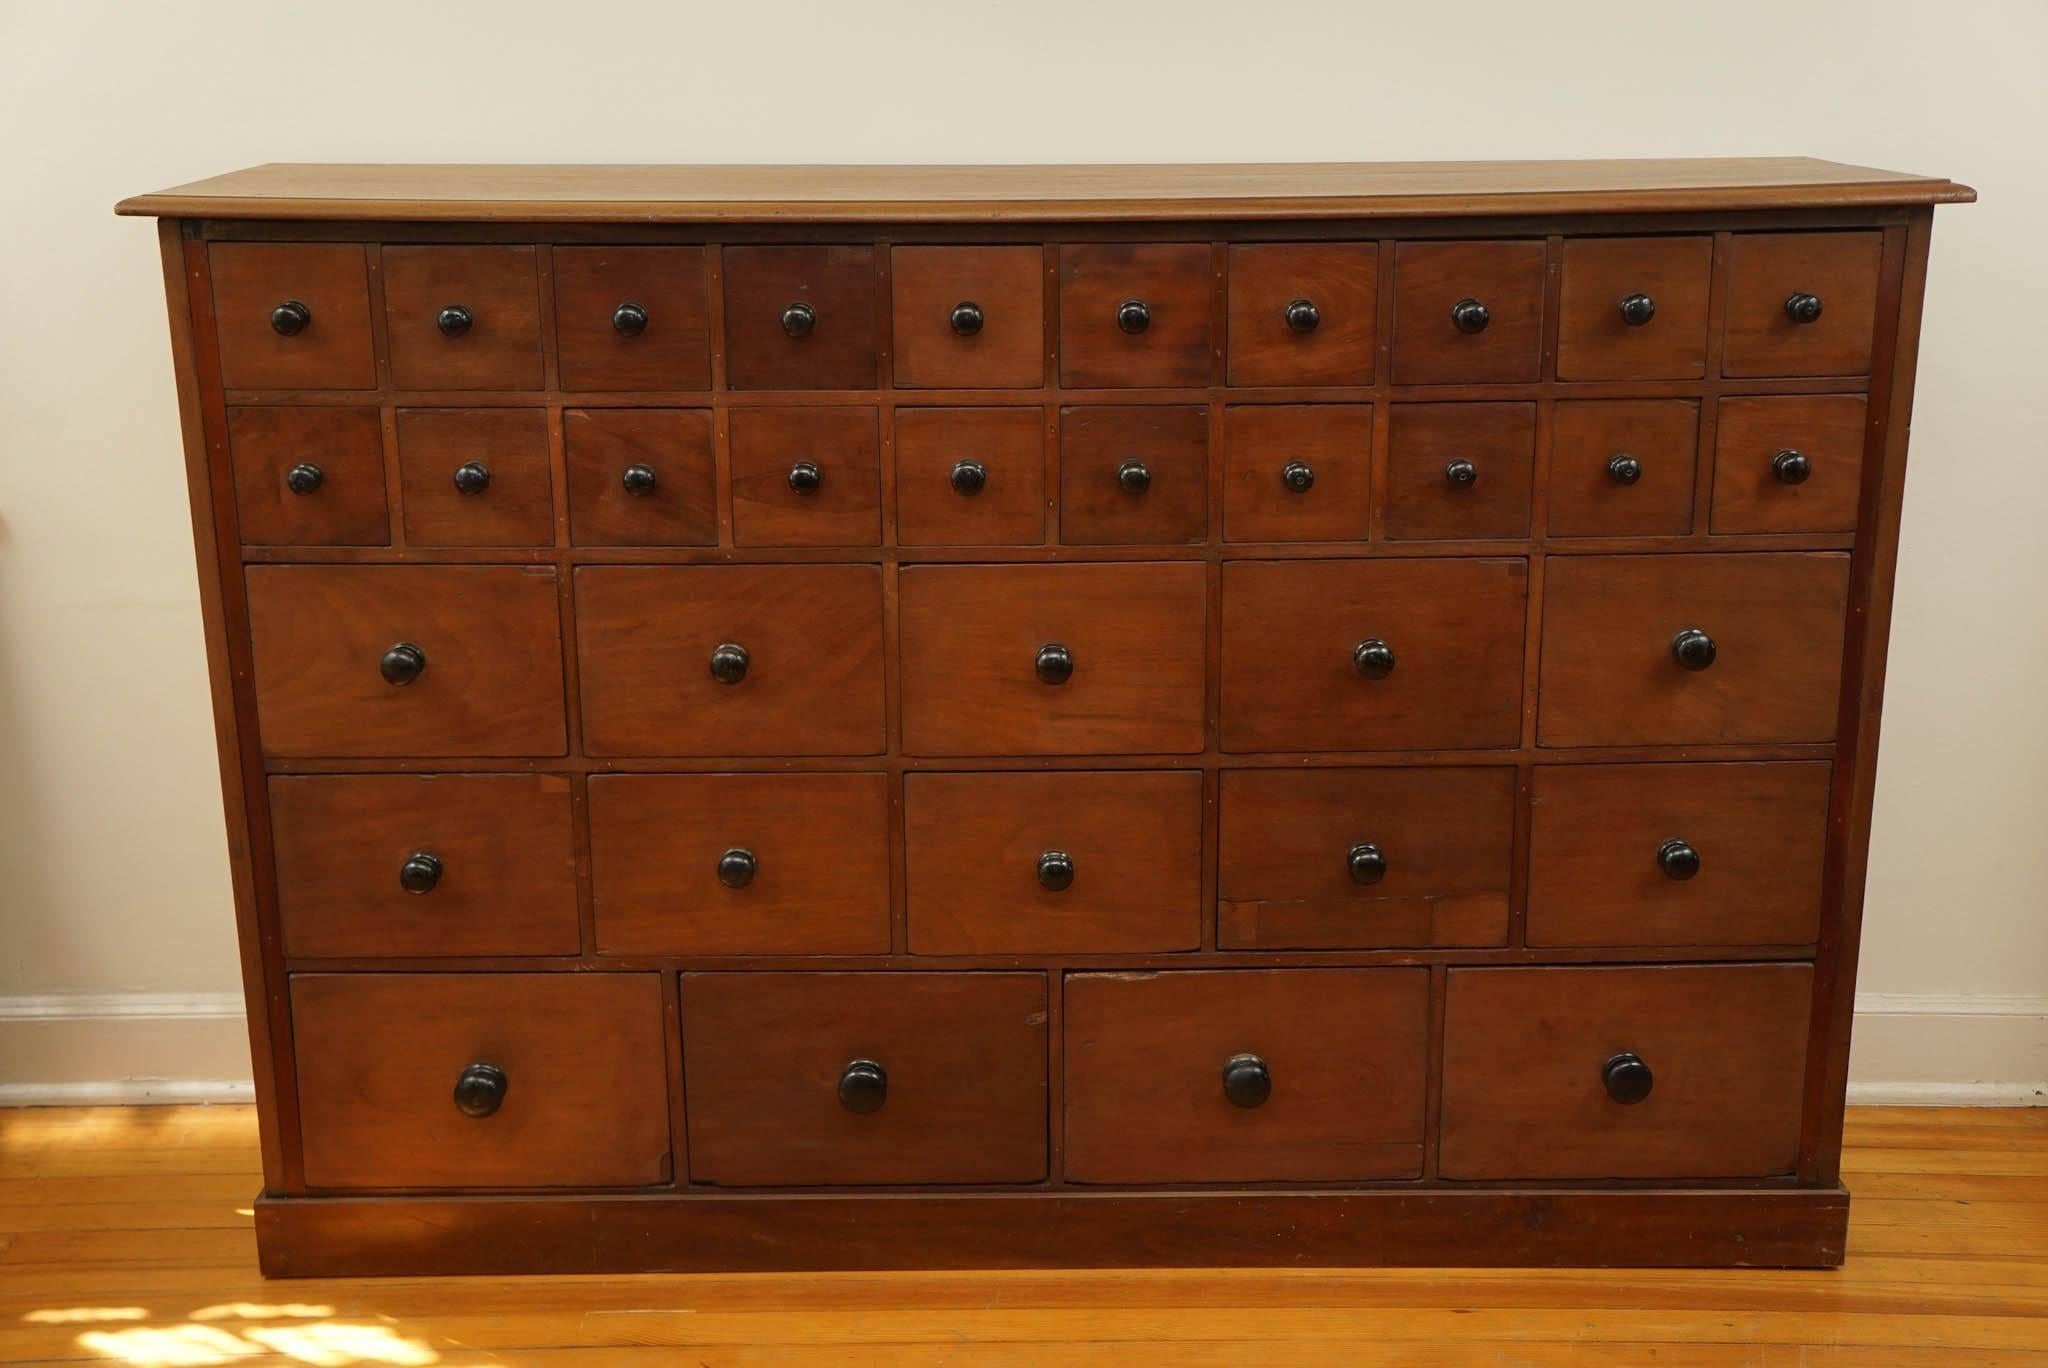 Special, special, special. There are no other words to properly describe this rich mahogany apothecary. 20 drawers on top ten larger drawers in the middle and four larger drawers on the bottom. This is combined with rich black knobs and yes, all the